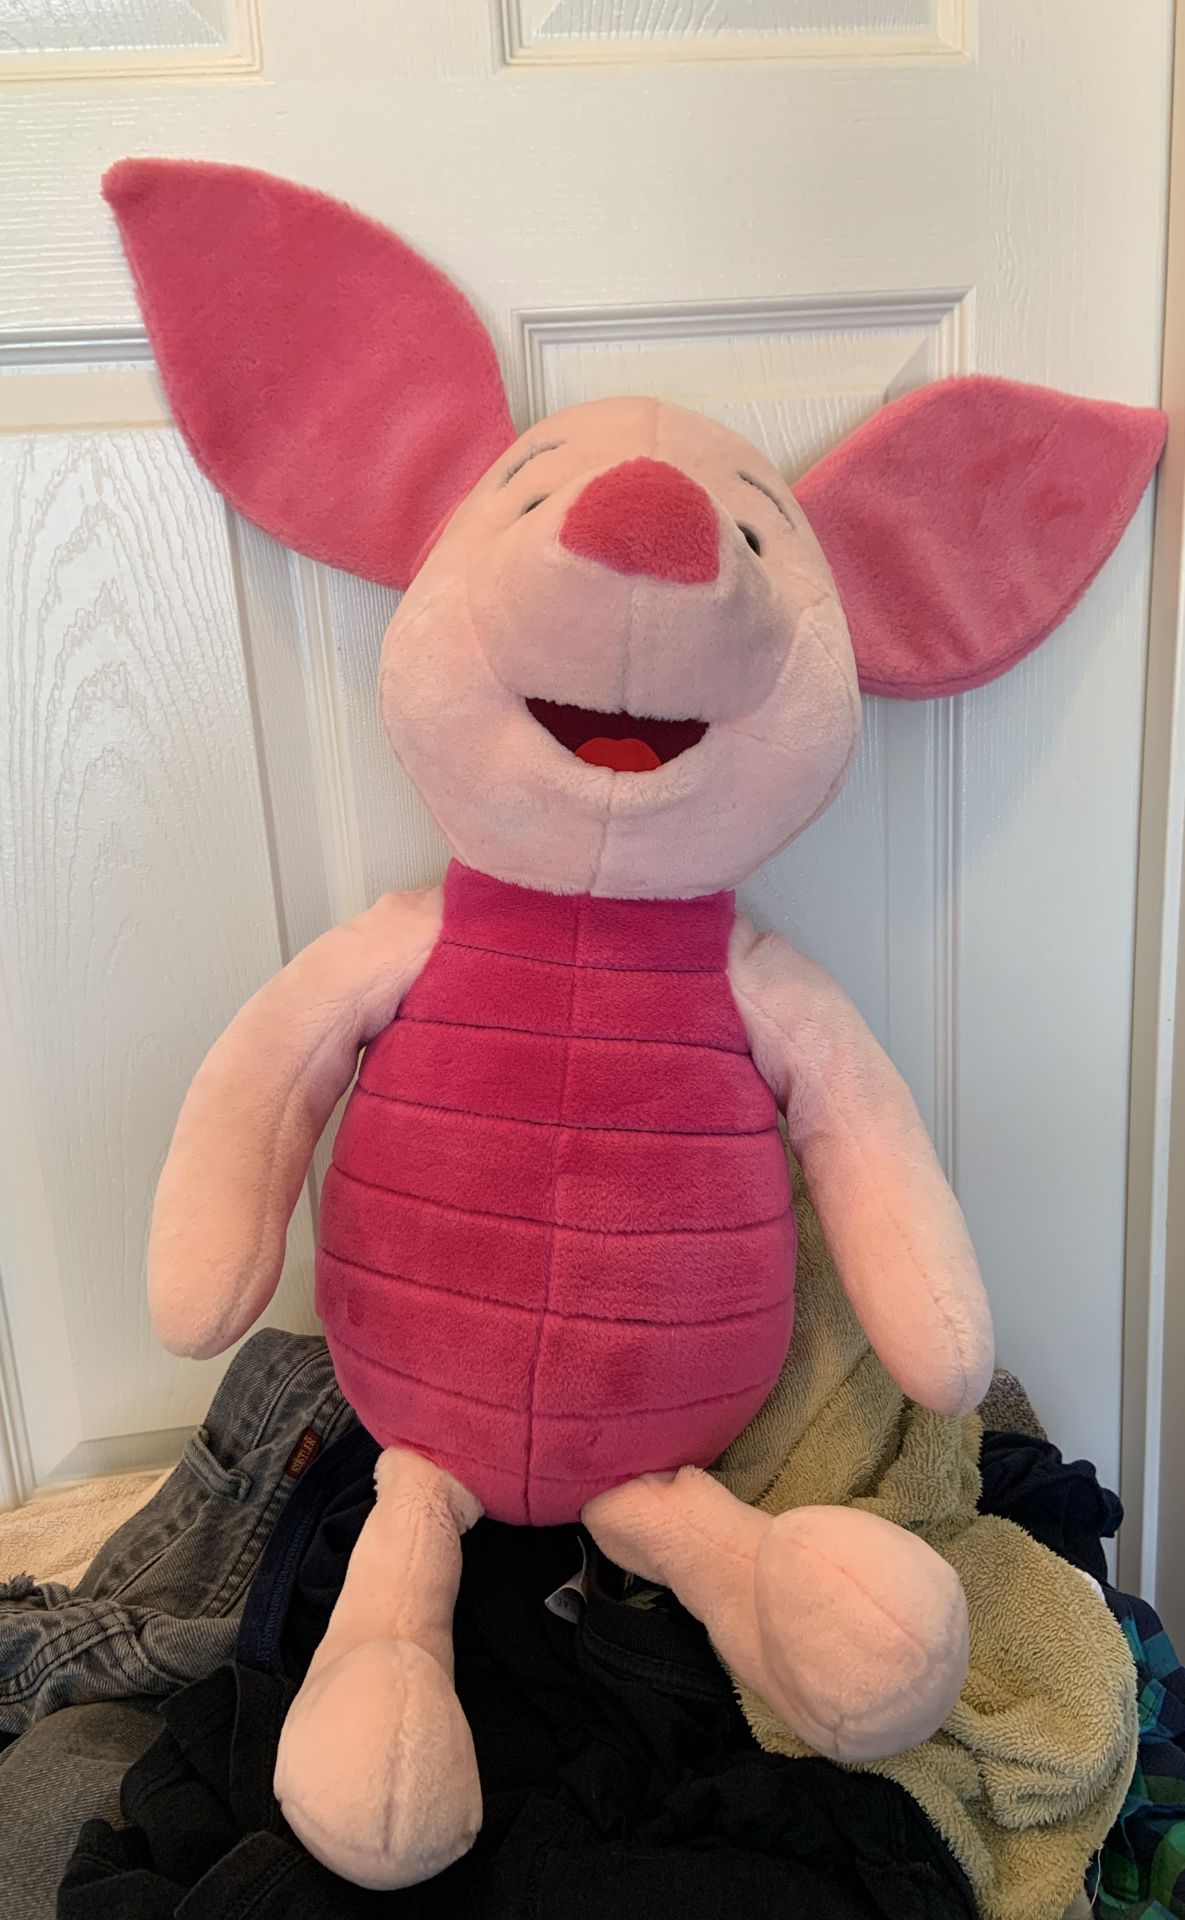 Piglet stuffed animal approx 2.5ft tall giant